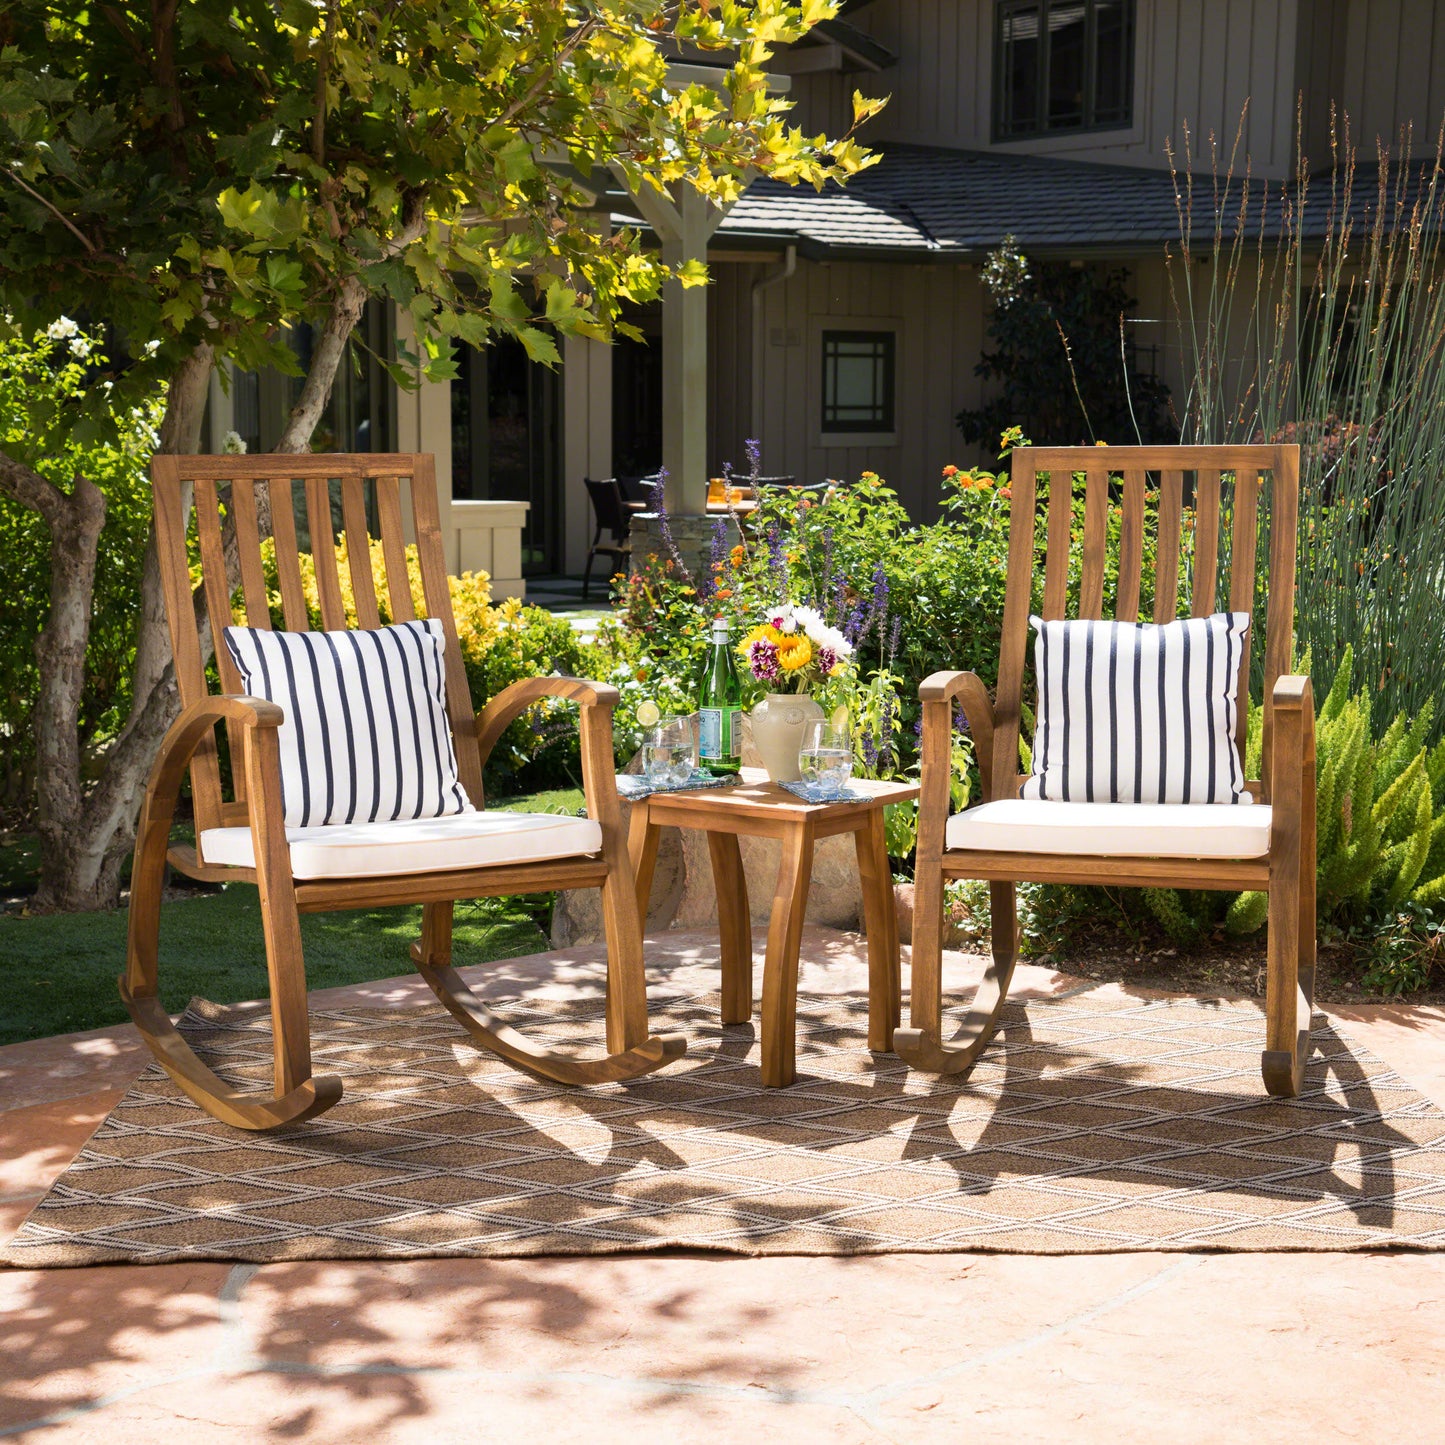 Cattan Outdoor Natural Stained Acacia Wood Rocking Chair Chat Set